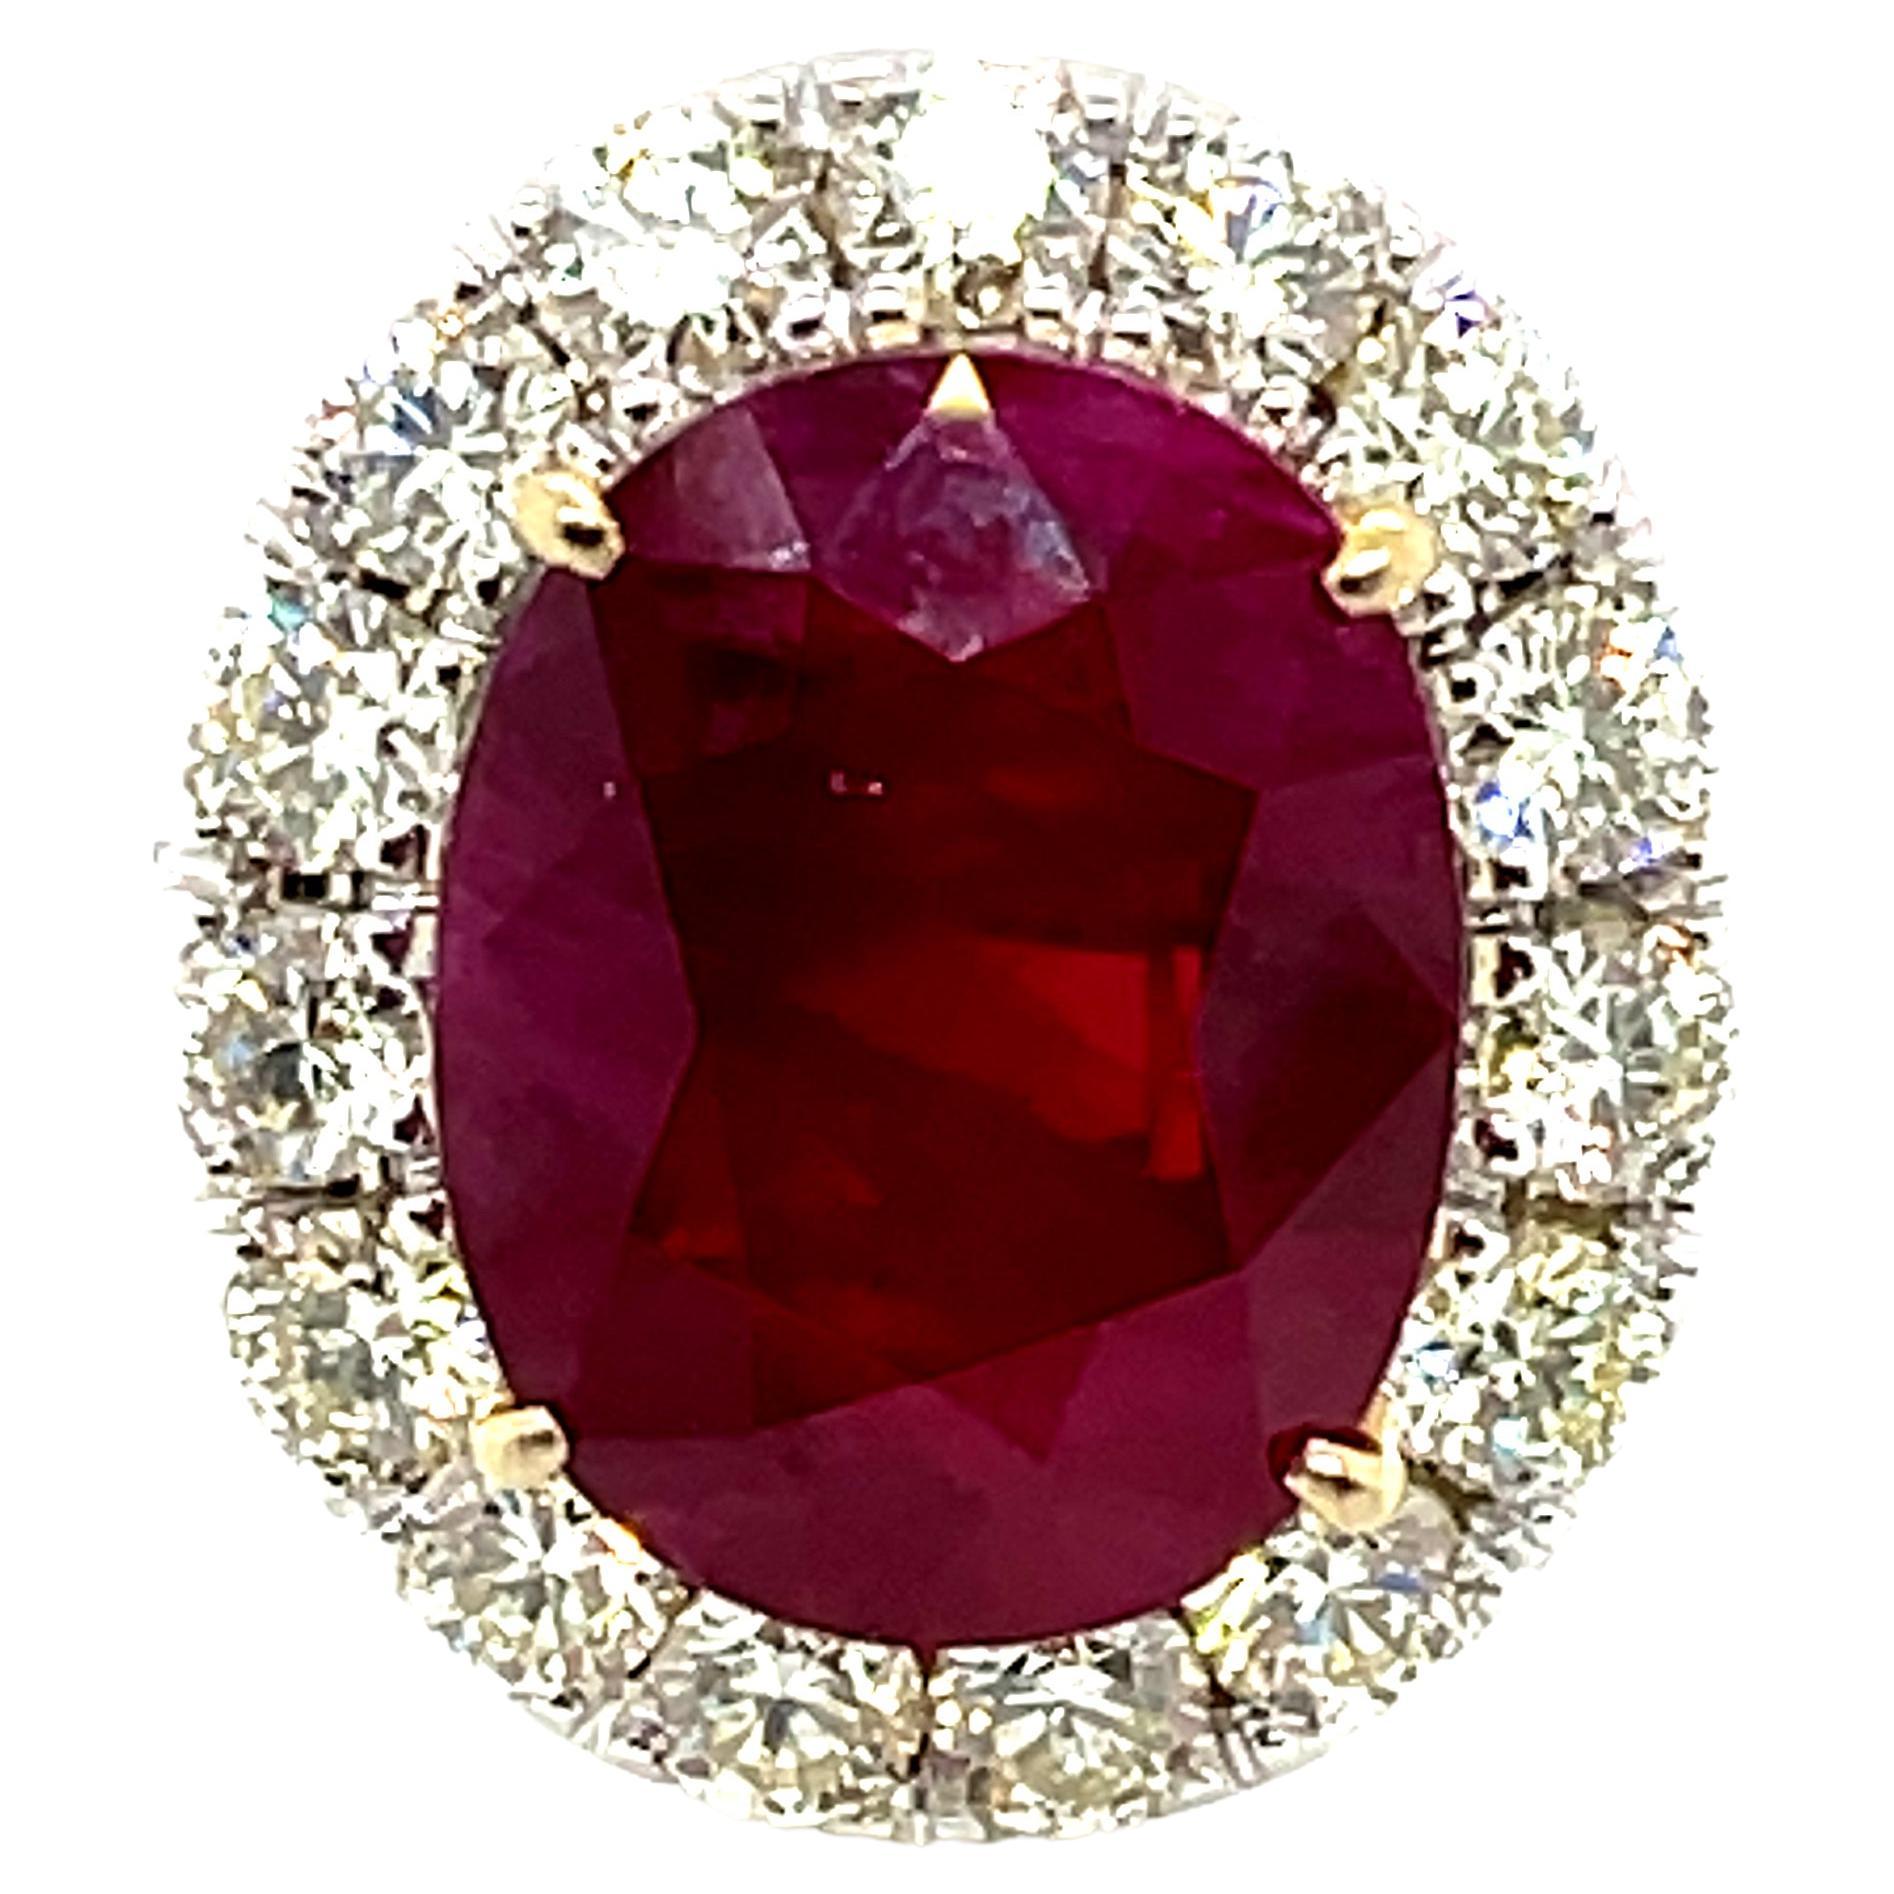 A majestic masterpiece, fit for all queens out there.

This regal piece features a stunning 10.58-carat heated oval ruby, accentuated by 15 round diamonds (1.92 ct). 

It comes with a GRS certificate, proving its origin and authenticity.

It is set